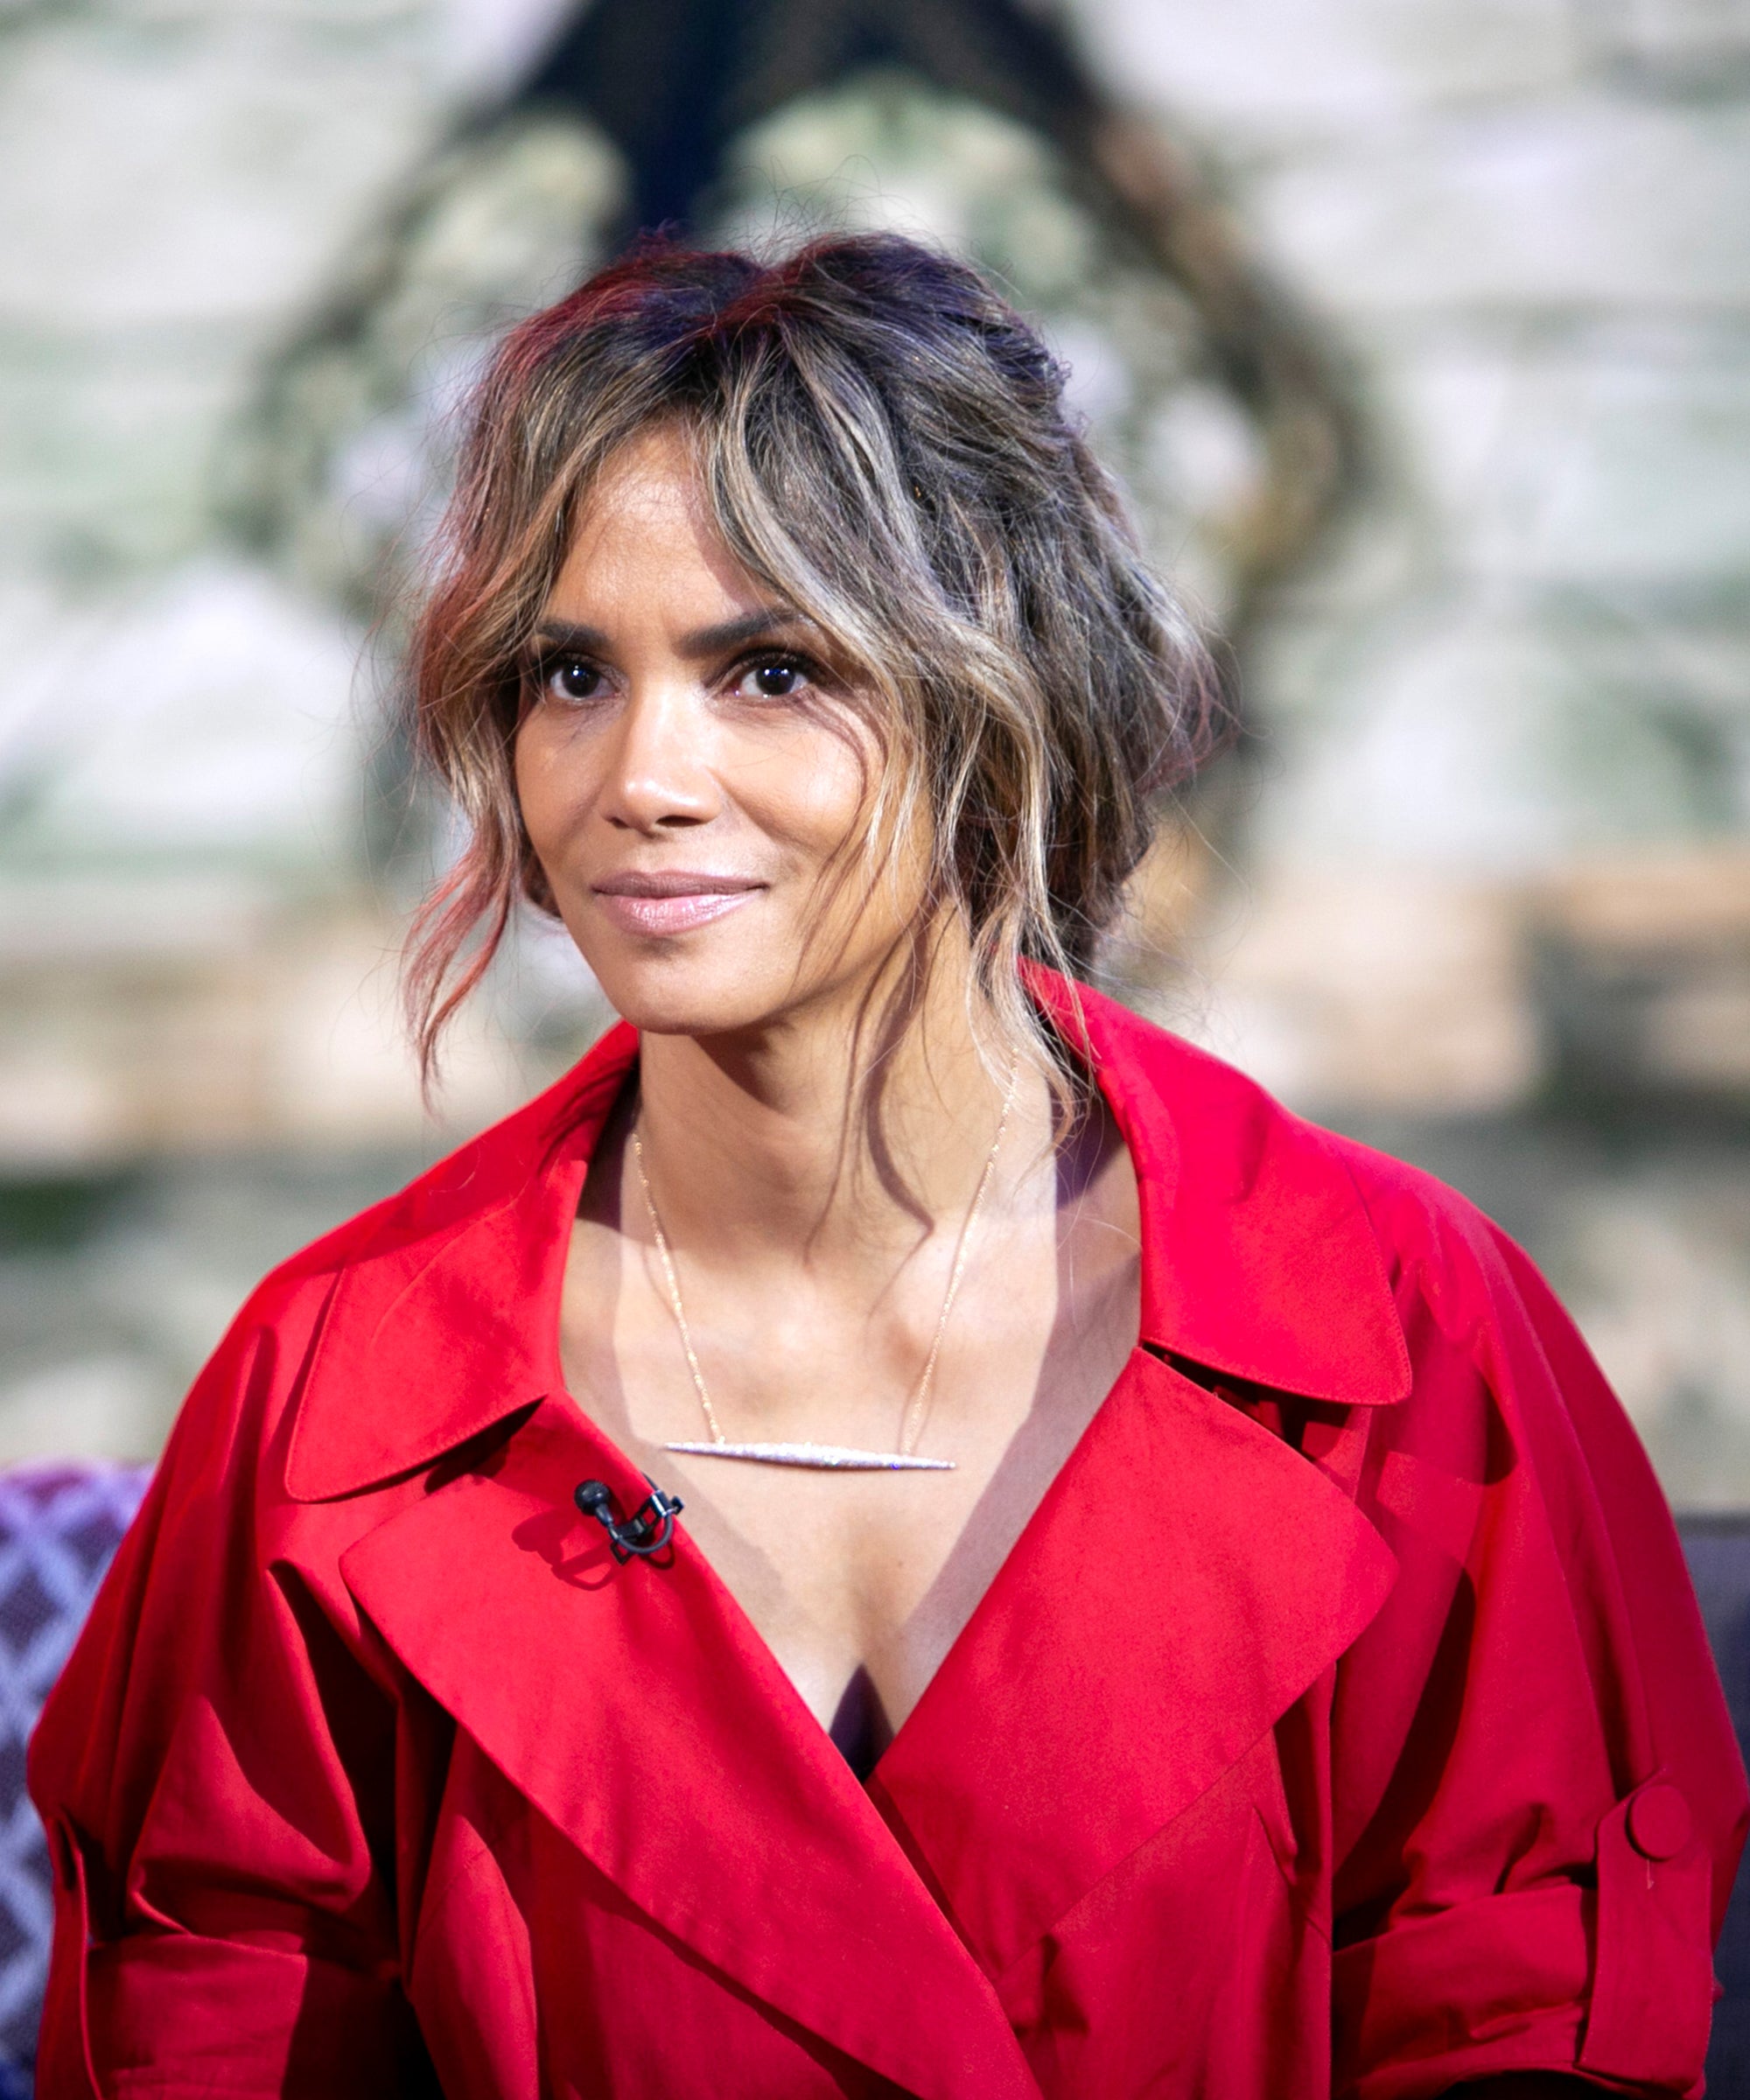 Halle Berry apologizes and is no longer considering a transgender